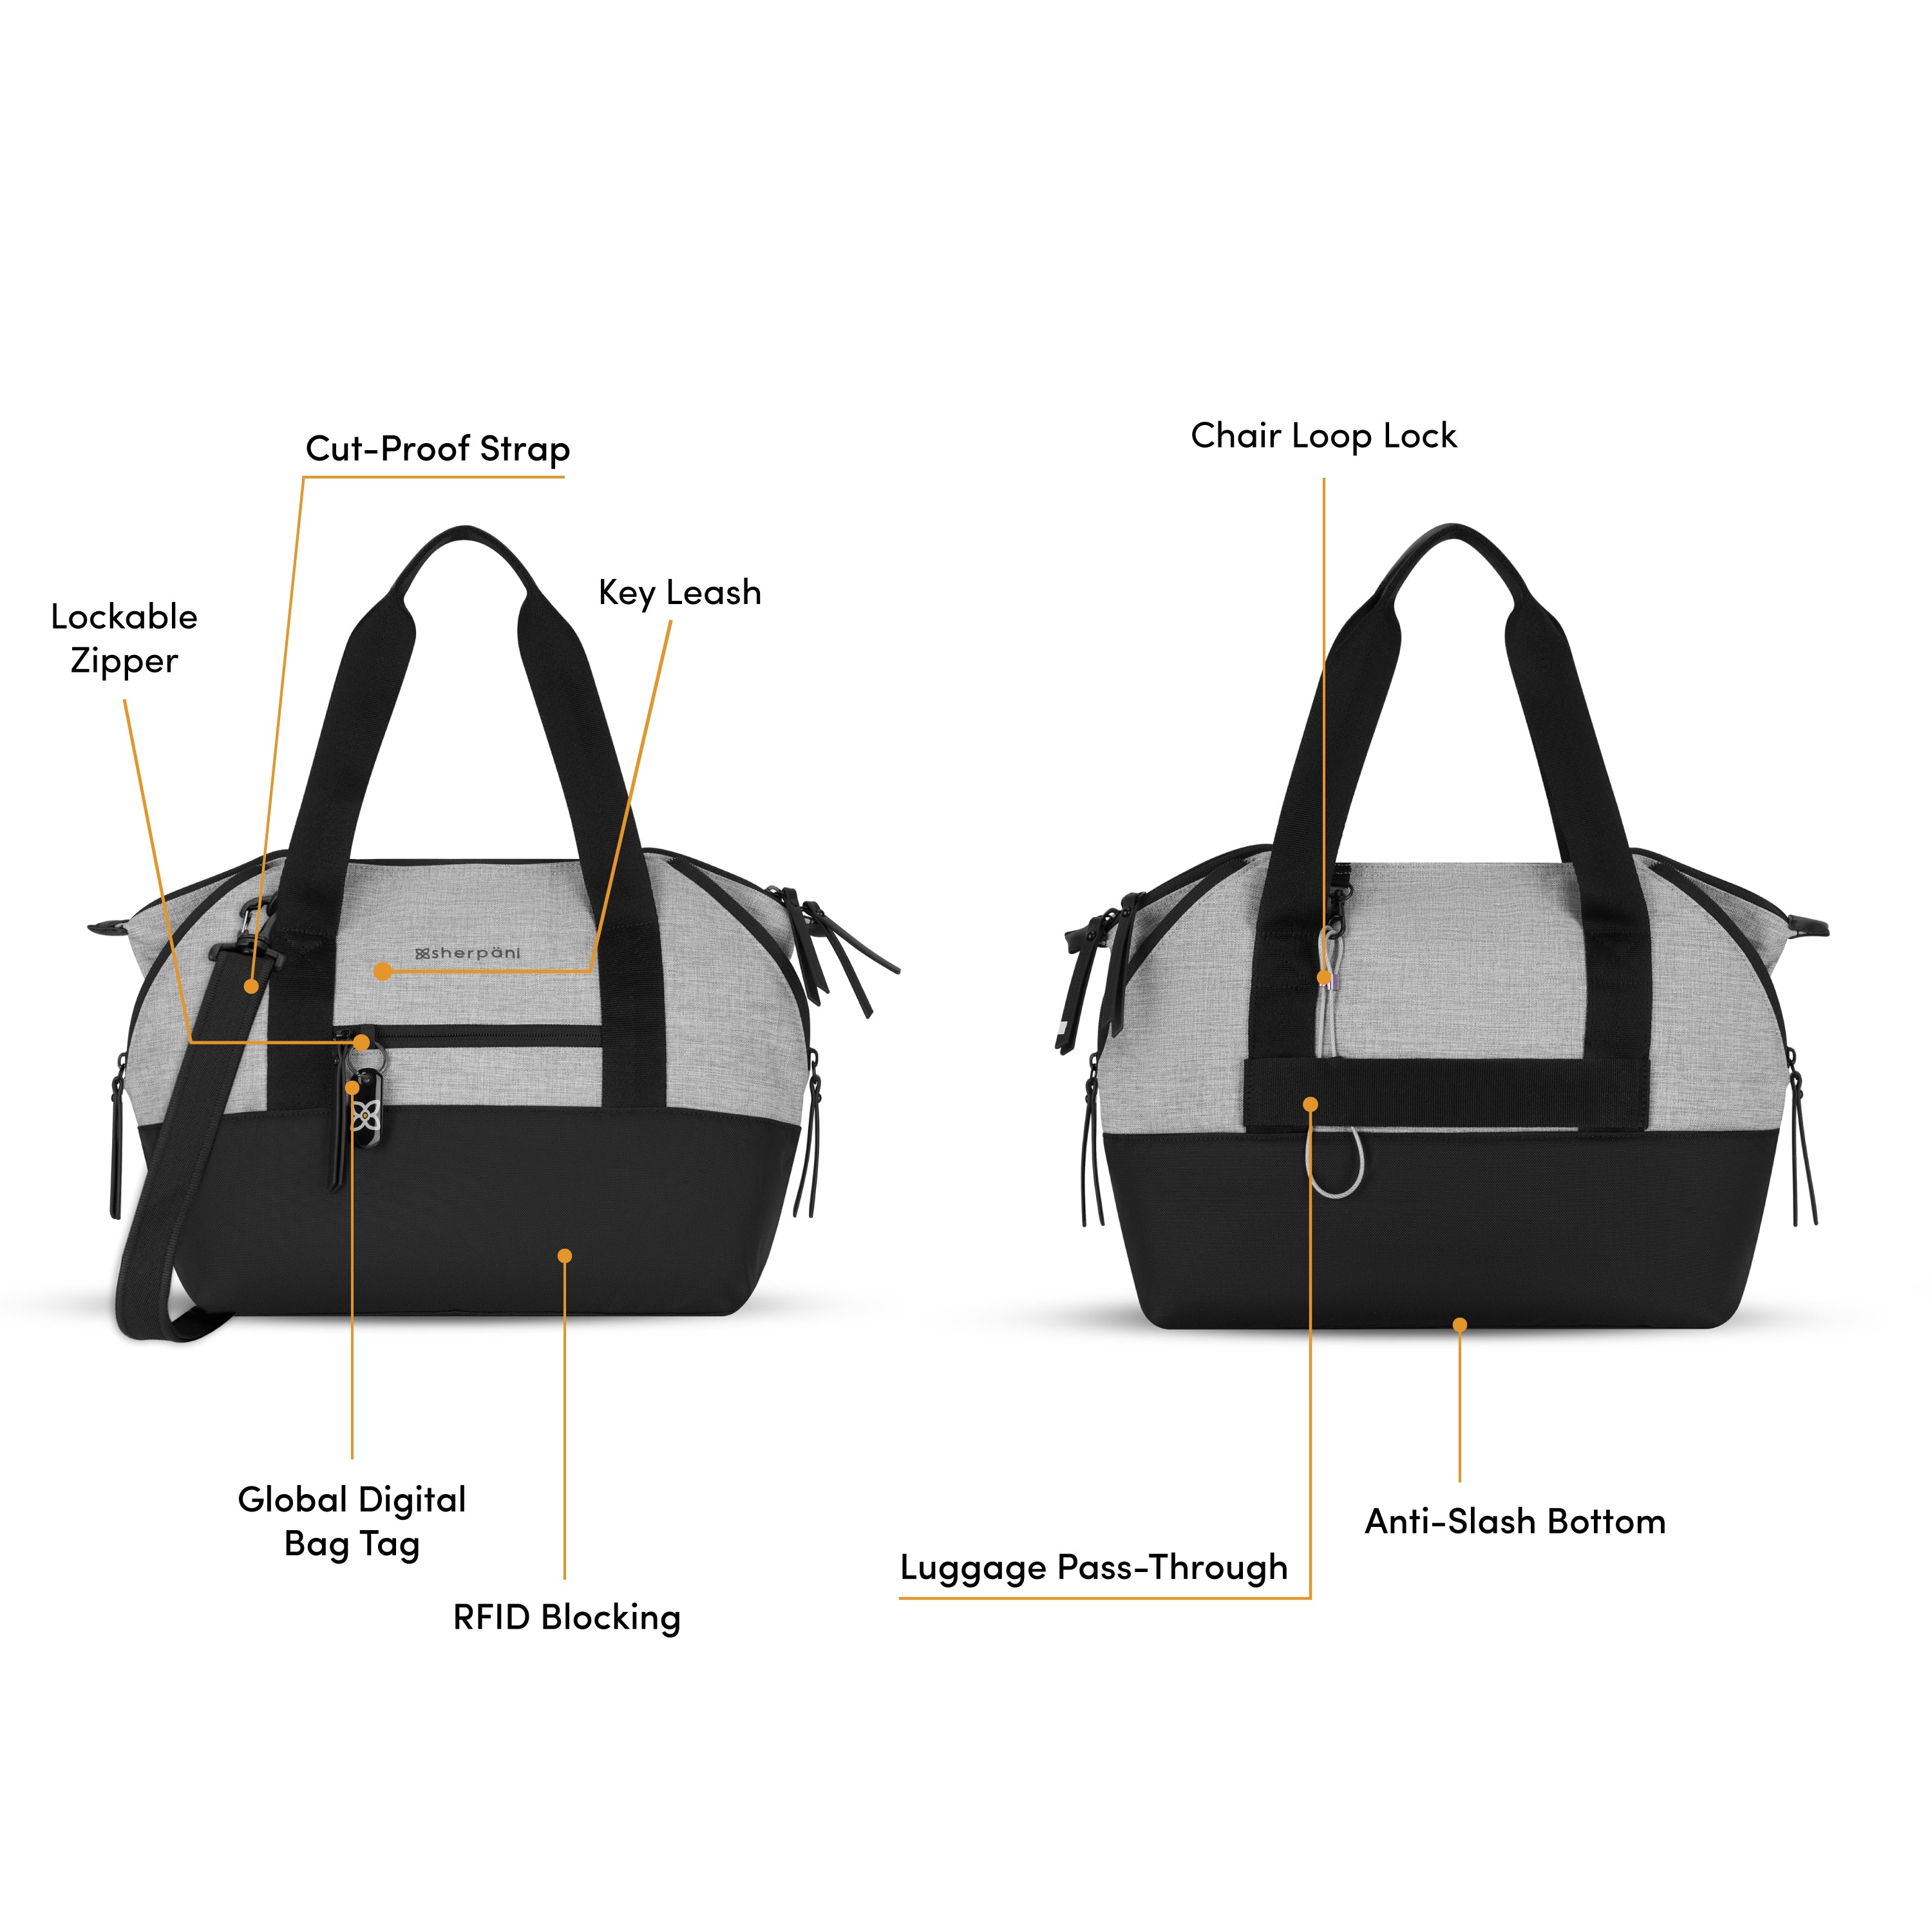 Graphic showcasing the features of Sherpani expandable purse, the Eclipse. Bag features include: Cut-Proof Strap, Lockable Zipper, Key Leash, Global Digital Bag Tag, RFID-Blocking Technology, Chair Loop Lock, Luggage Pass-Through and Anti-Slash Bottom. 